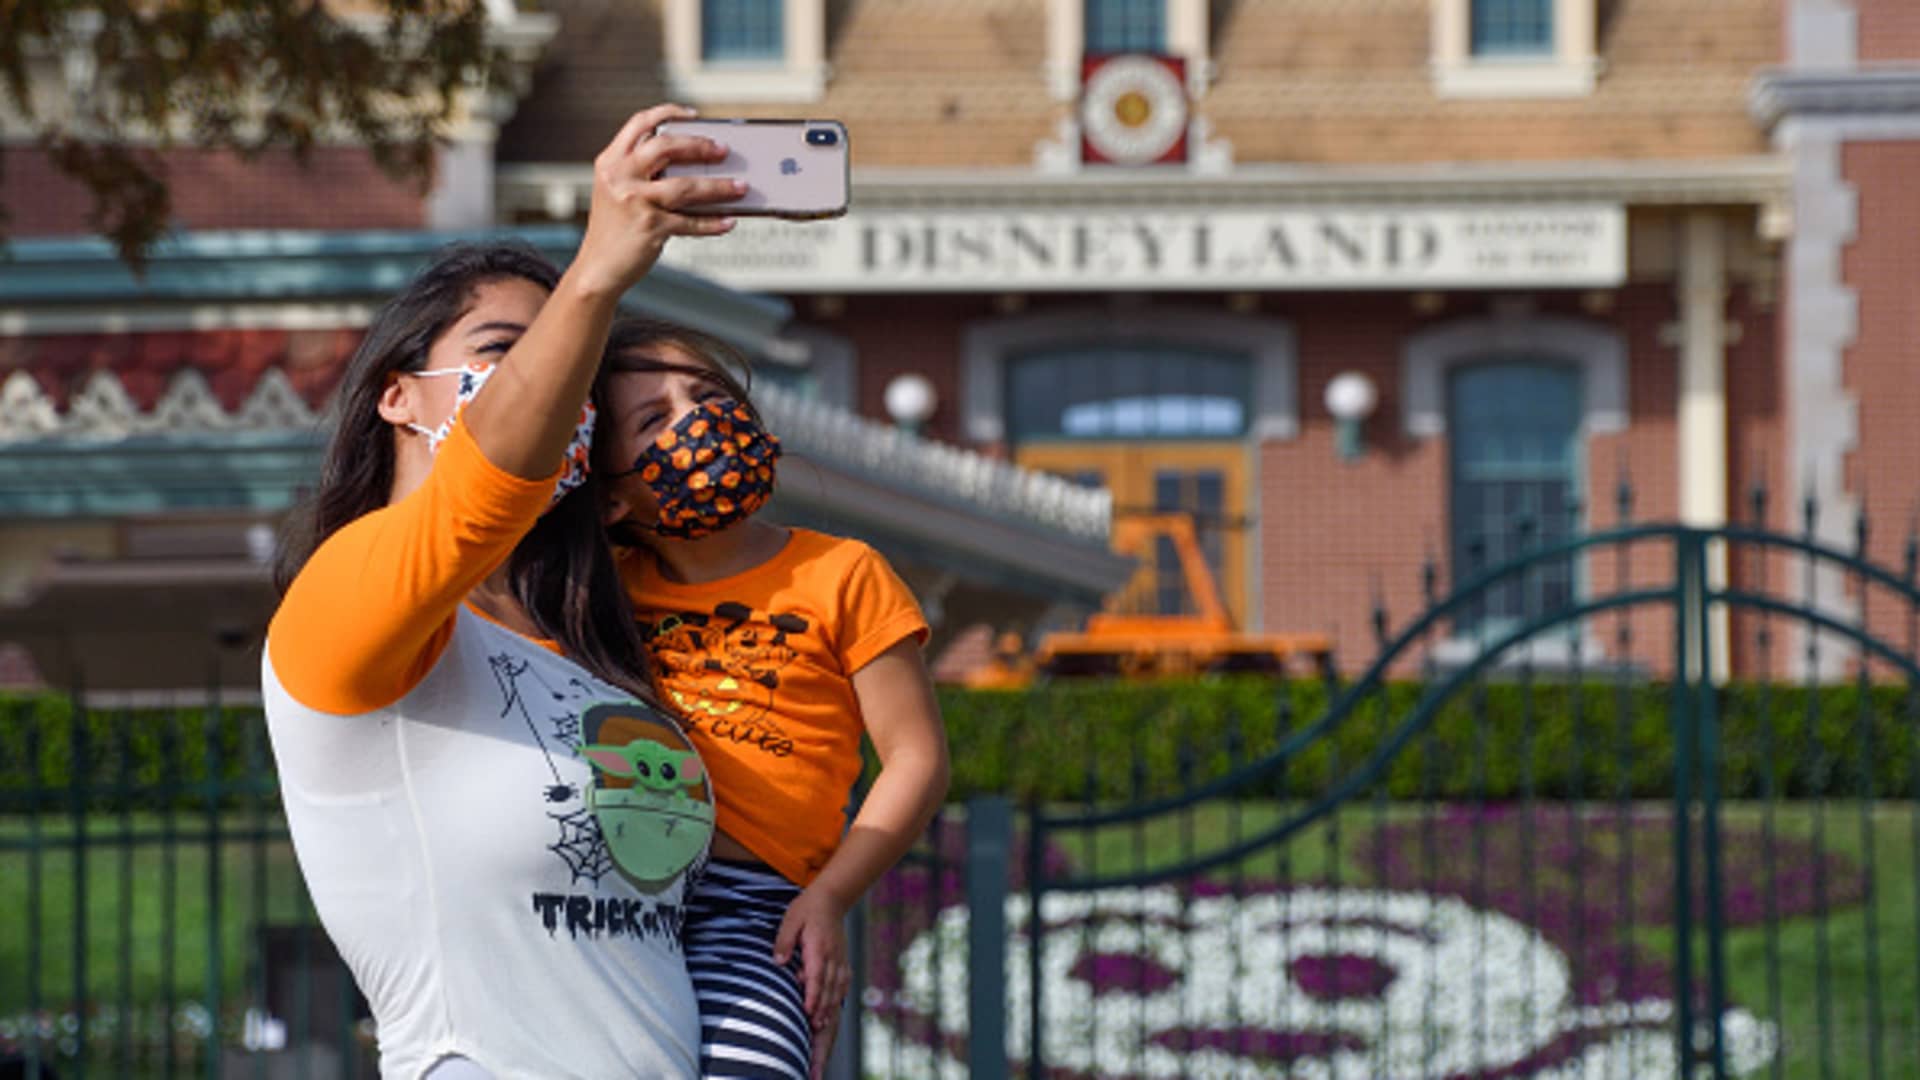 Brittany Losey takes a picture with her daughter Madison Losey, 7, outside the entrance to Disneyland at the Disneyland Resort is closed in Anaheim, CA, on Thursday, October 22, 2020.